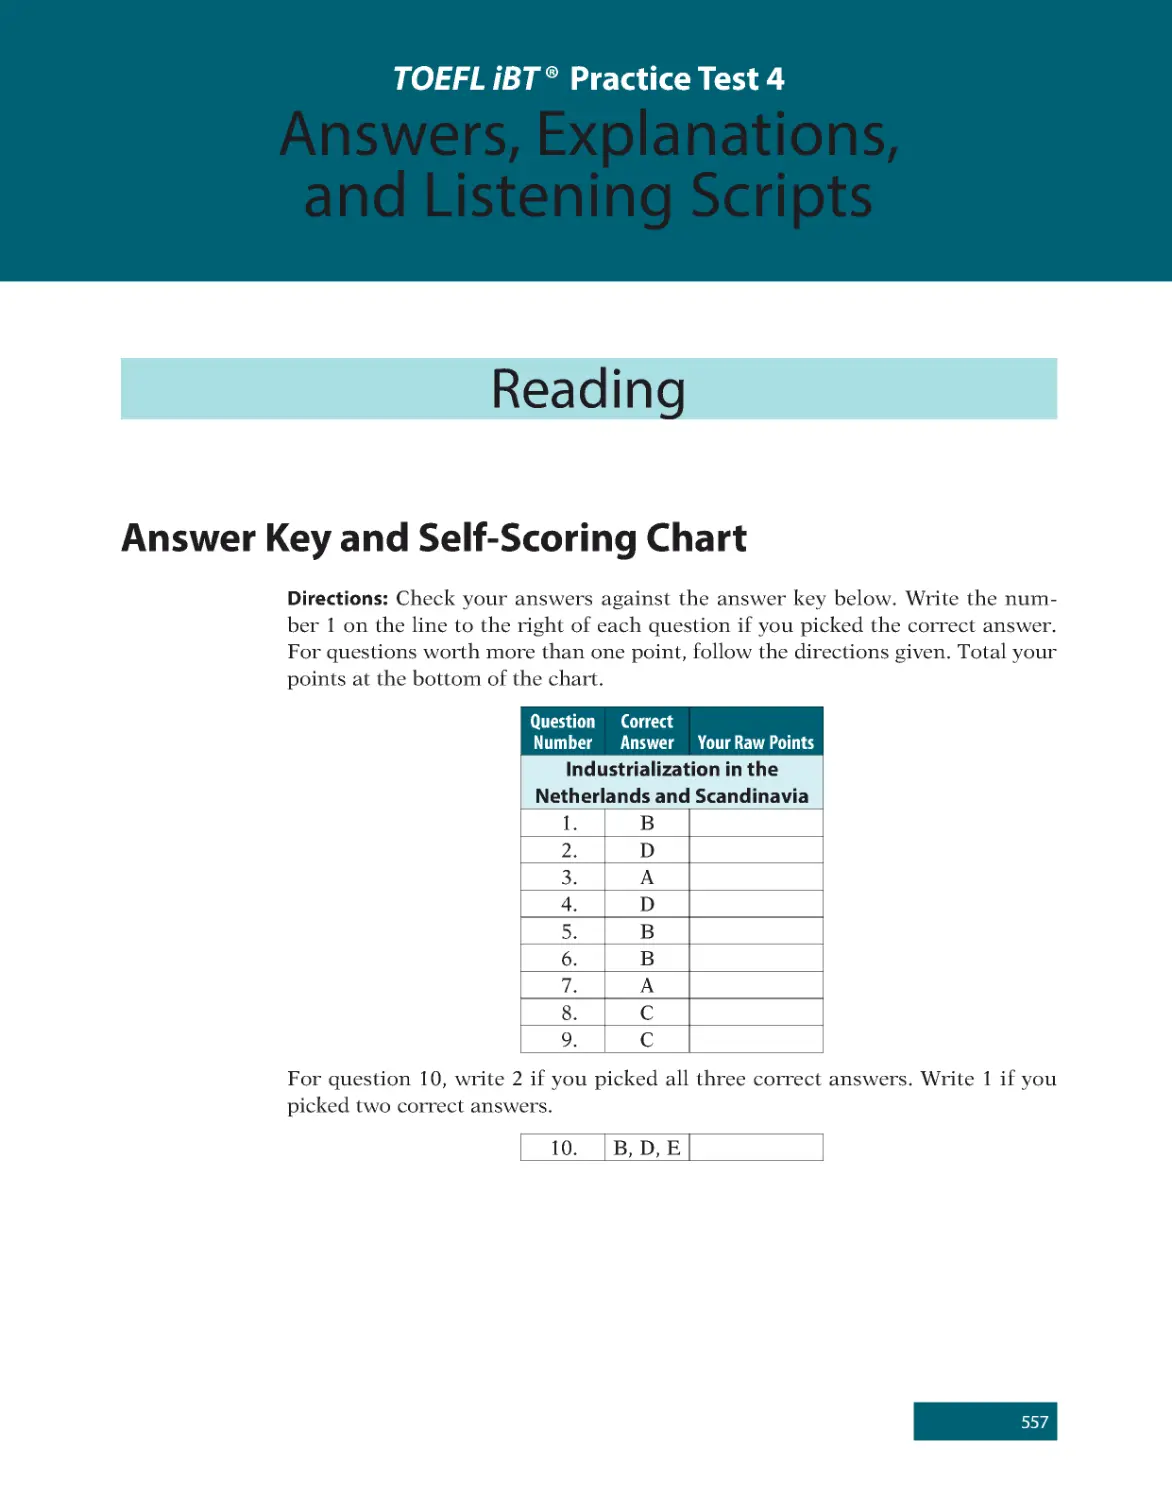 TOEFL iBT® Practice Test 4 Answers, Explanations, and Listening Scripts
Answer Key and Self-Scoring Chart